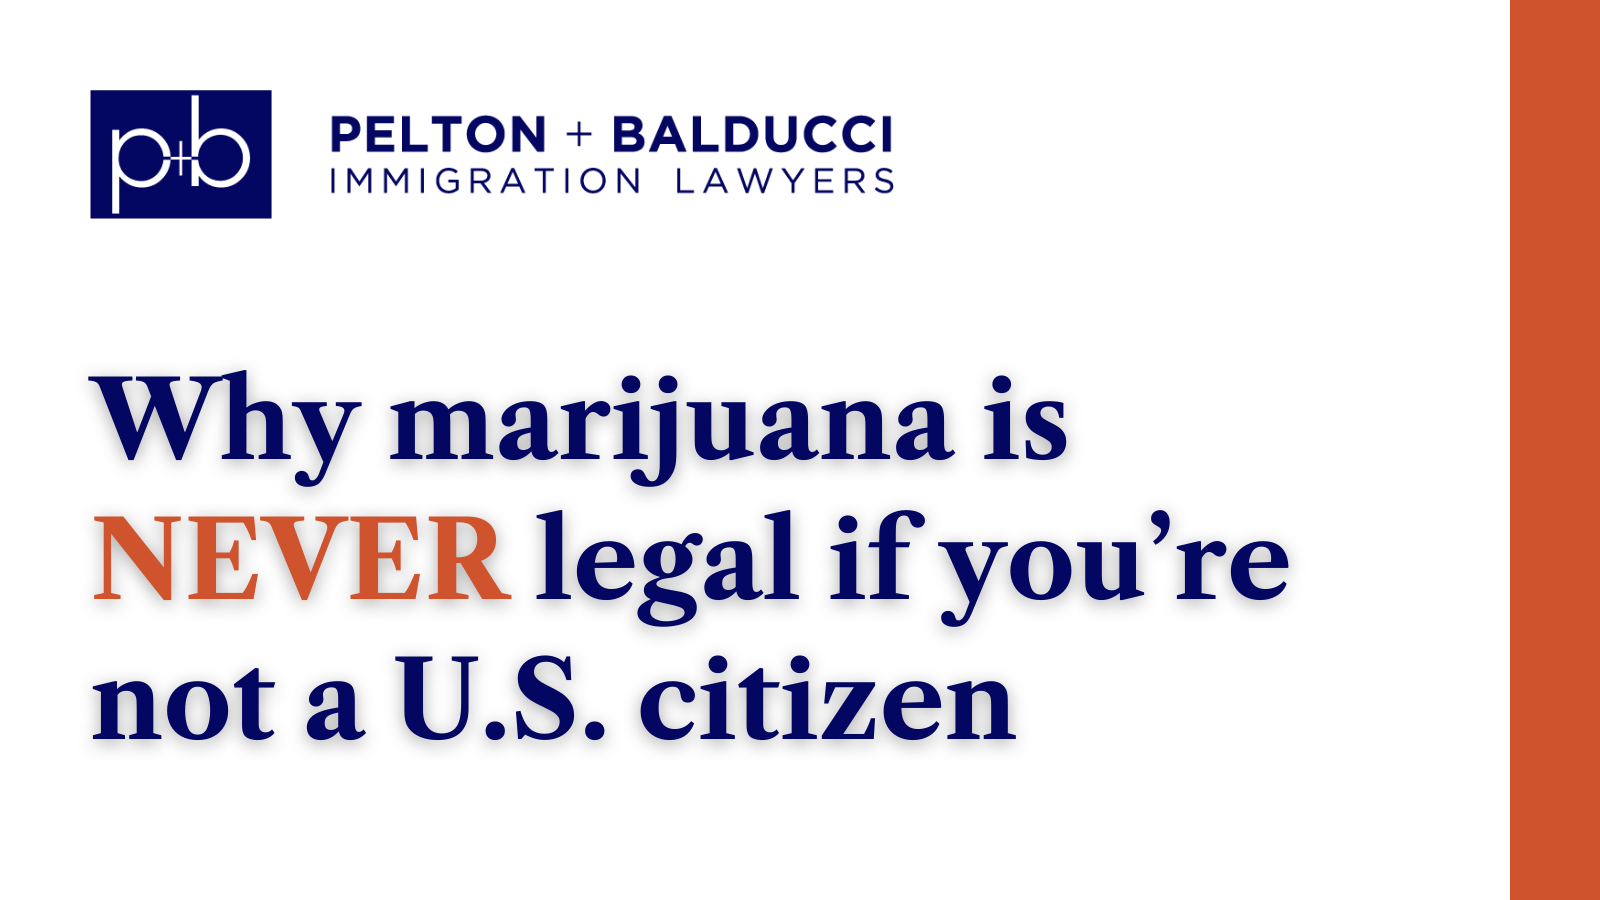 Why marijuana is NEVER legal if you’re not a U.S. citizen - New Orleans Immigration Lawyers - Pelton Balducci